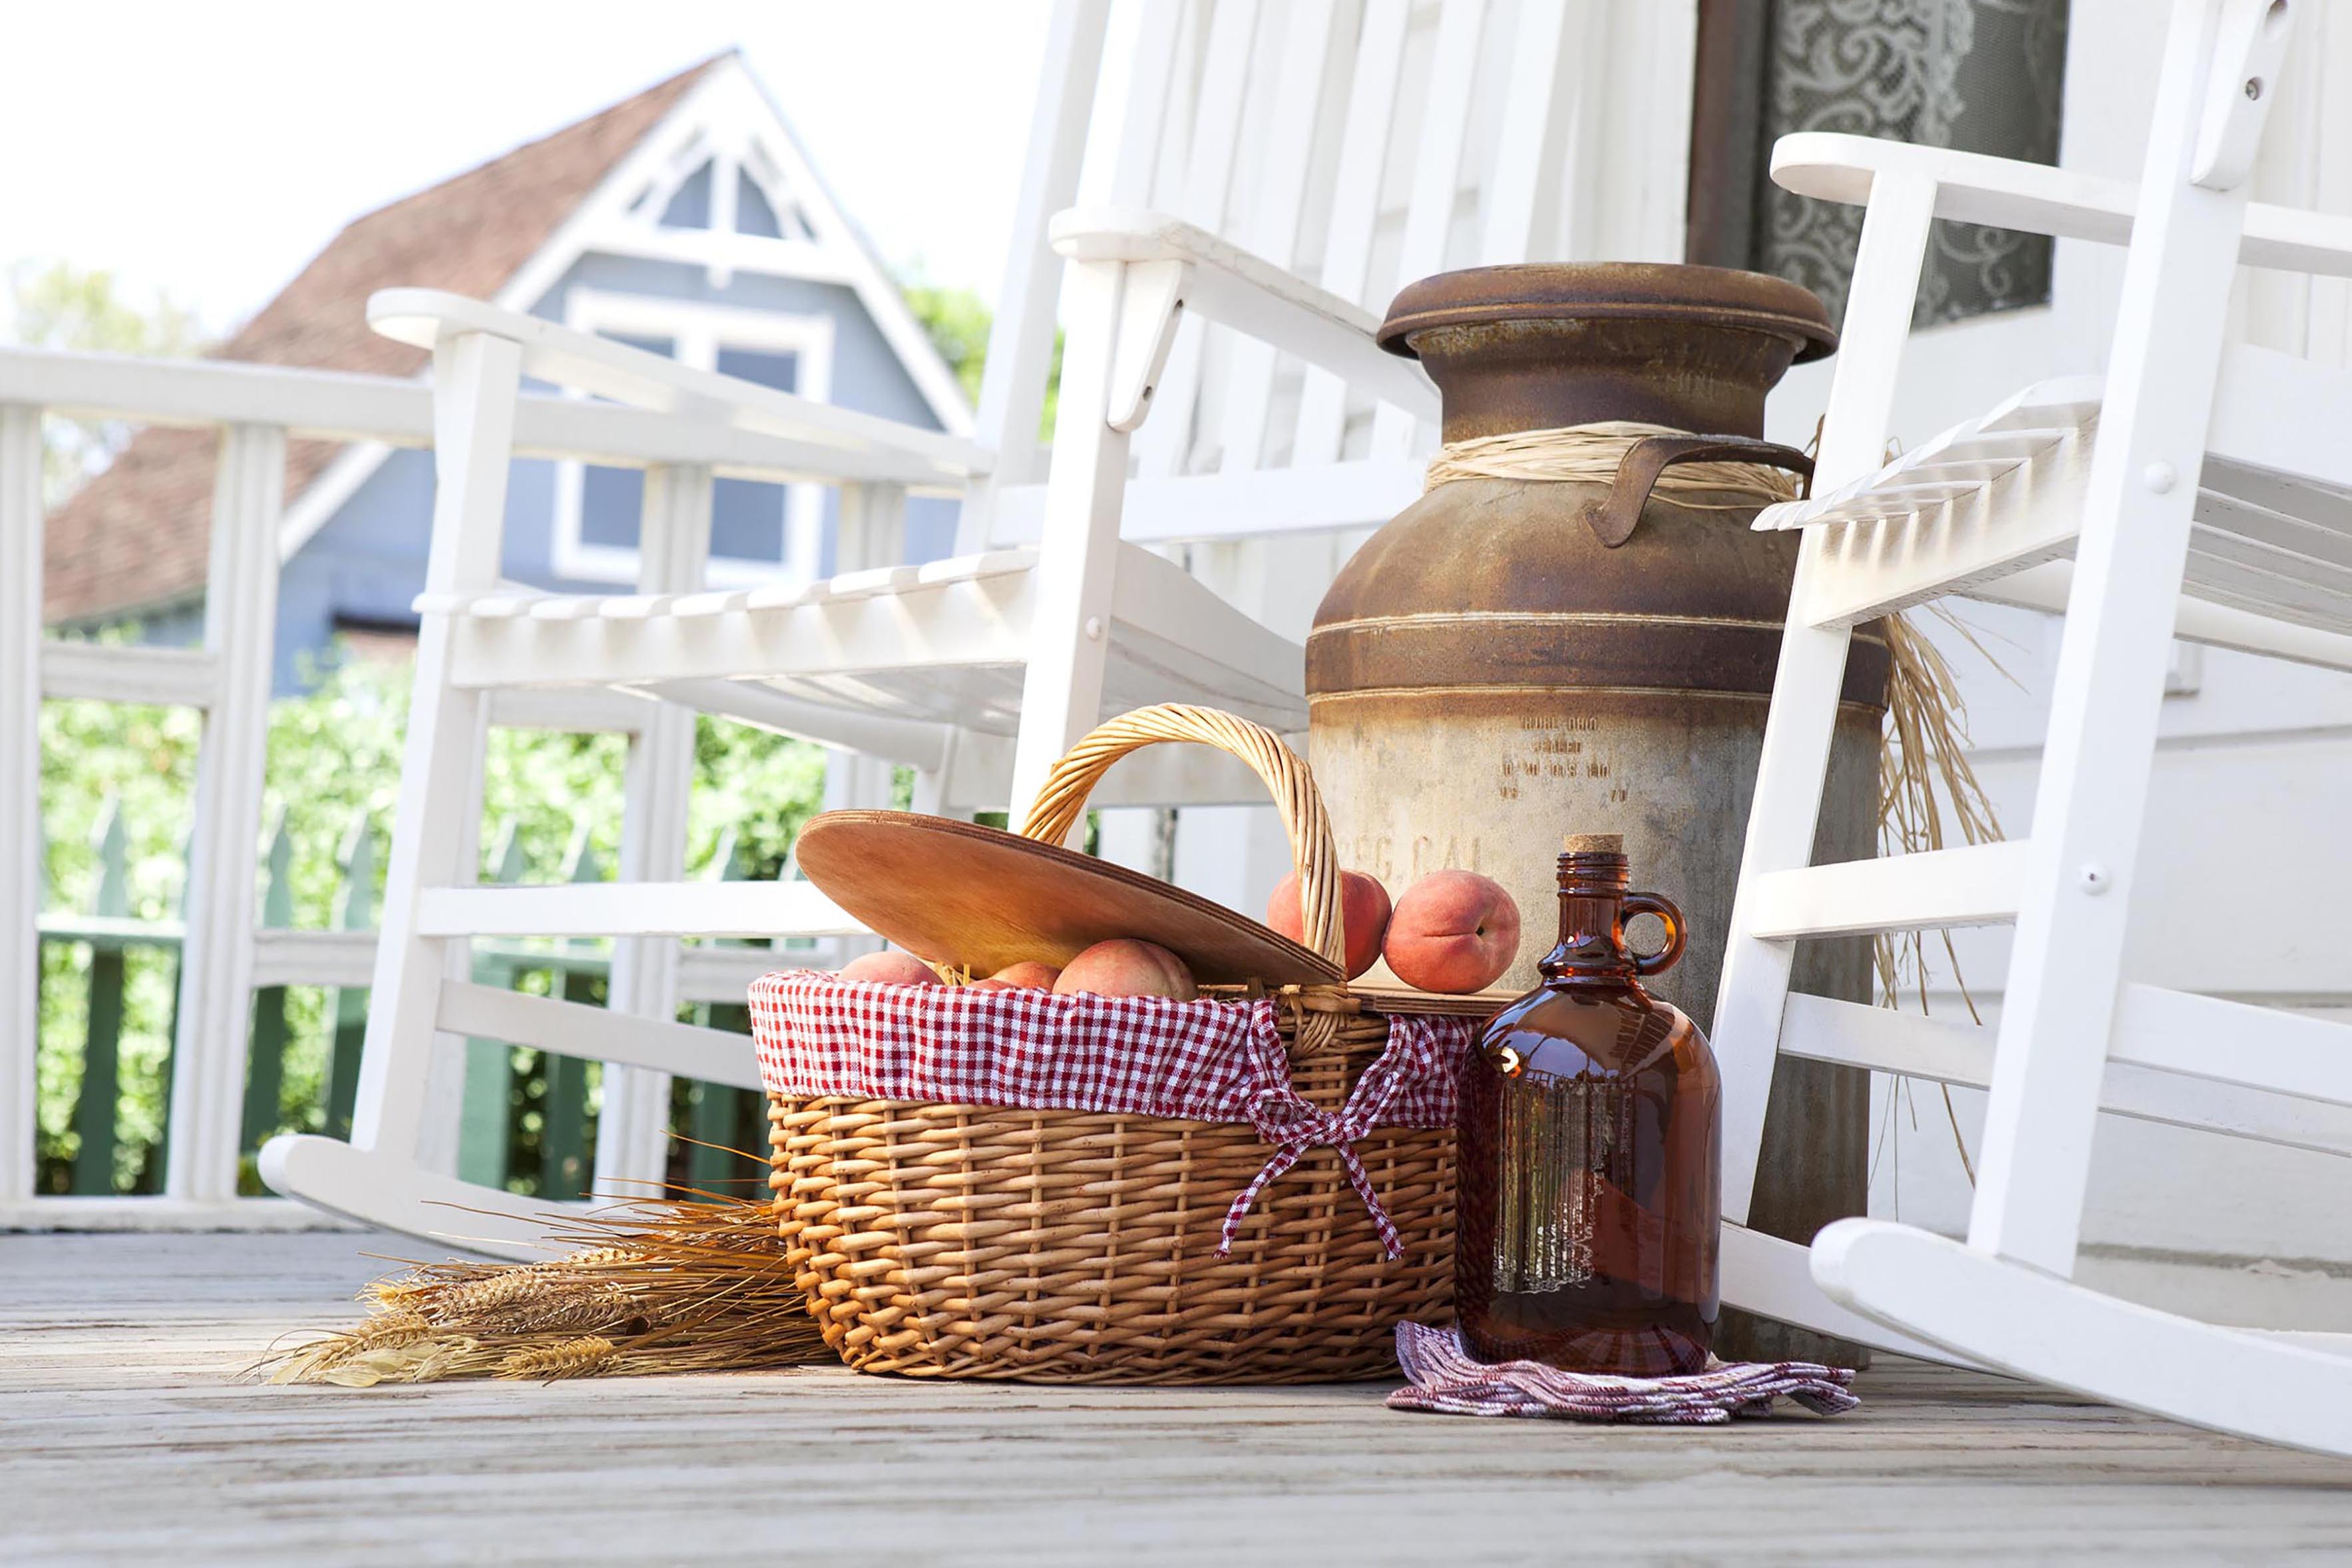 Cleveland Guardians - Country Picnic Basket